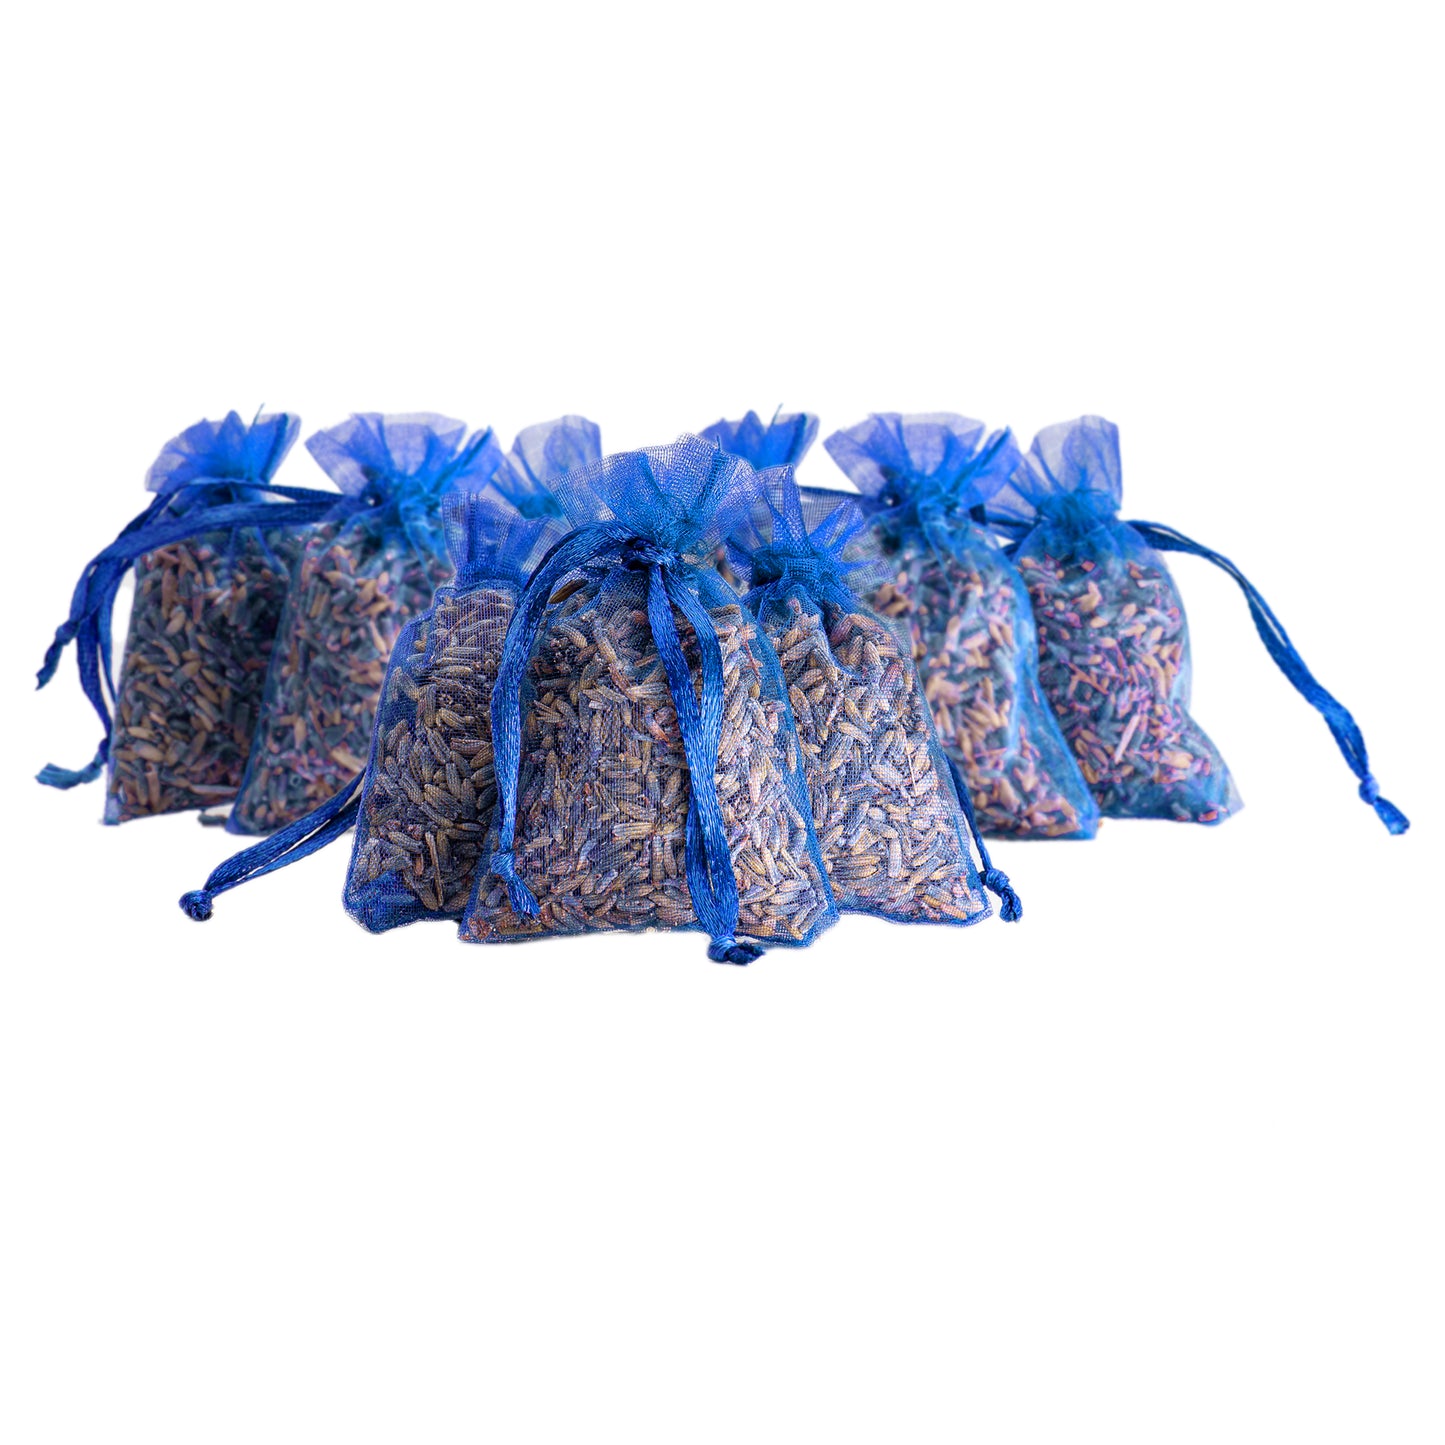 Lavender scented sachets, dark purple 10 x 3 grams. NOW €3.50 DISCOUNT at checkout!!